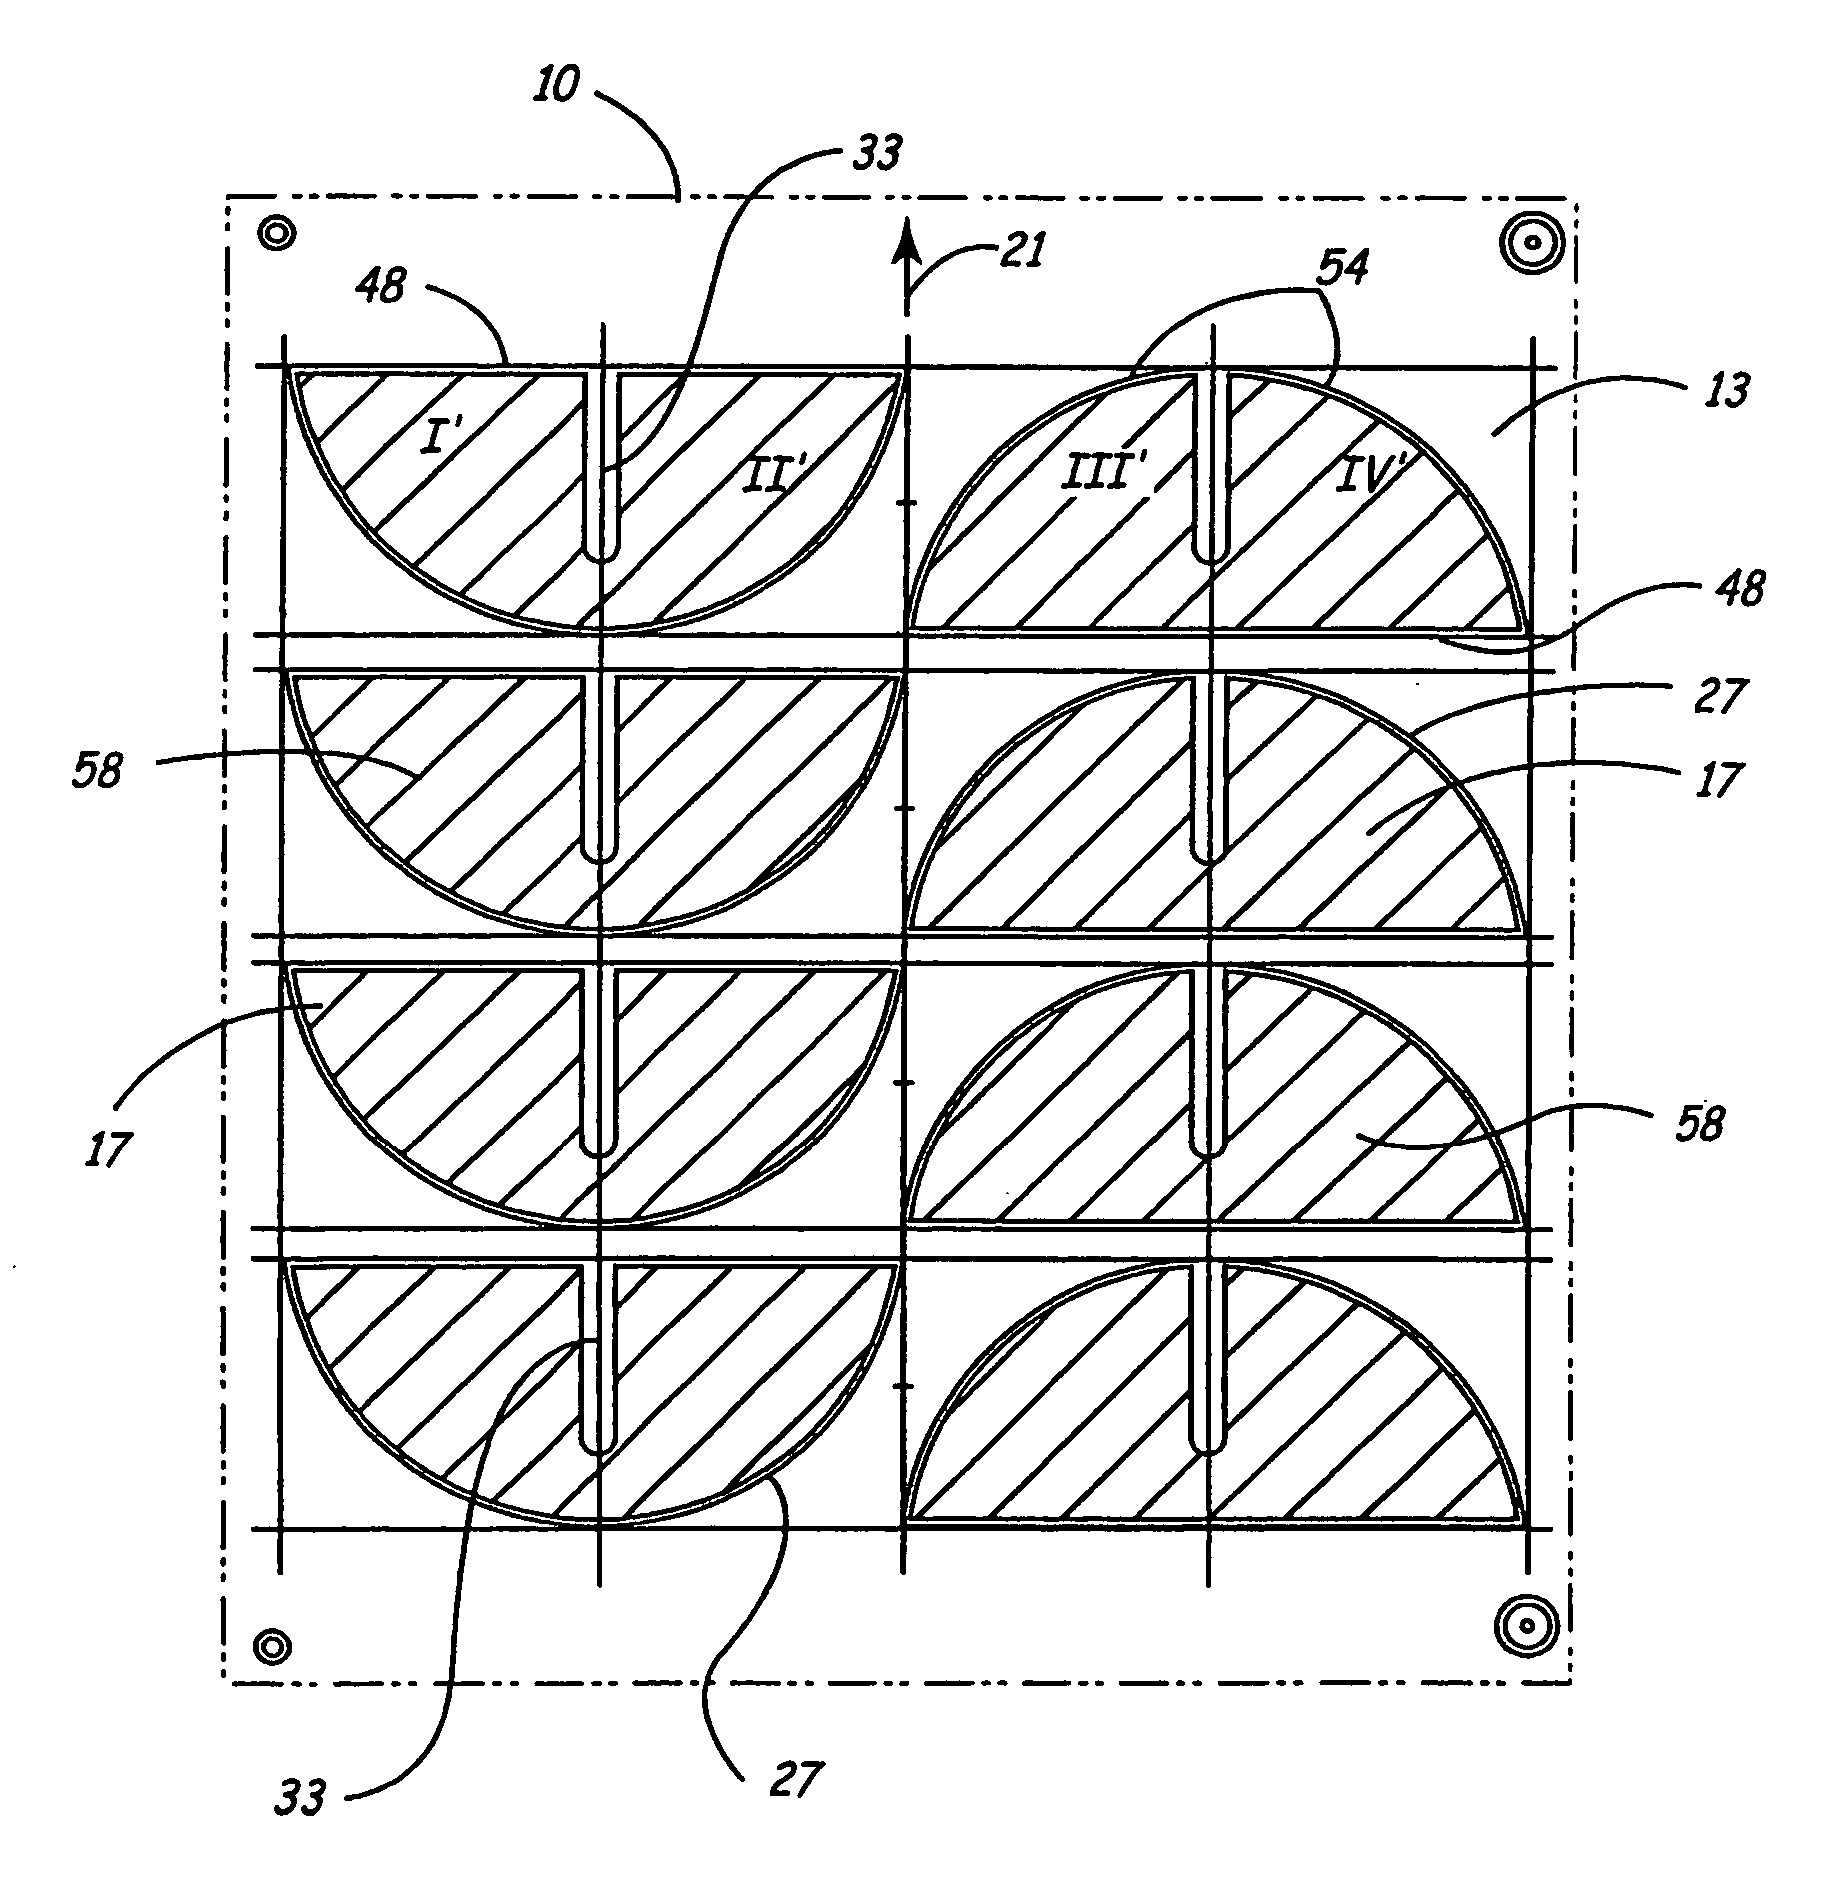 Complex-shaped ceramic capacitors for implantable cardioverter defibrillators and method of manufacture